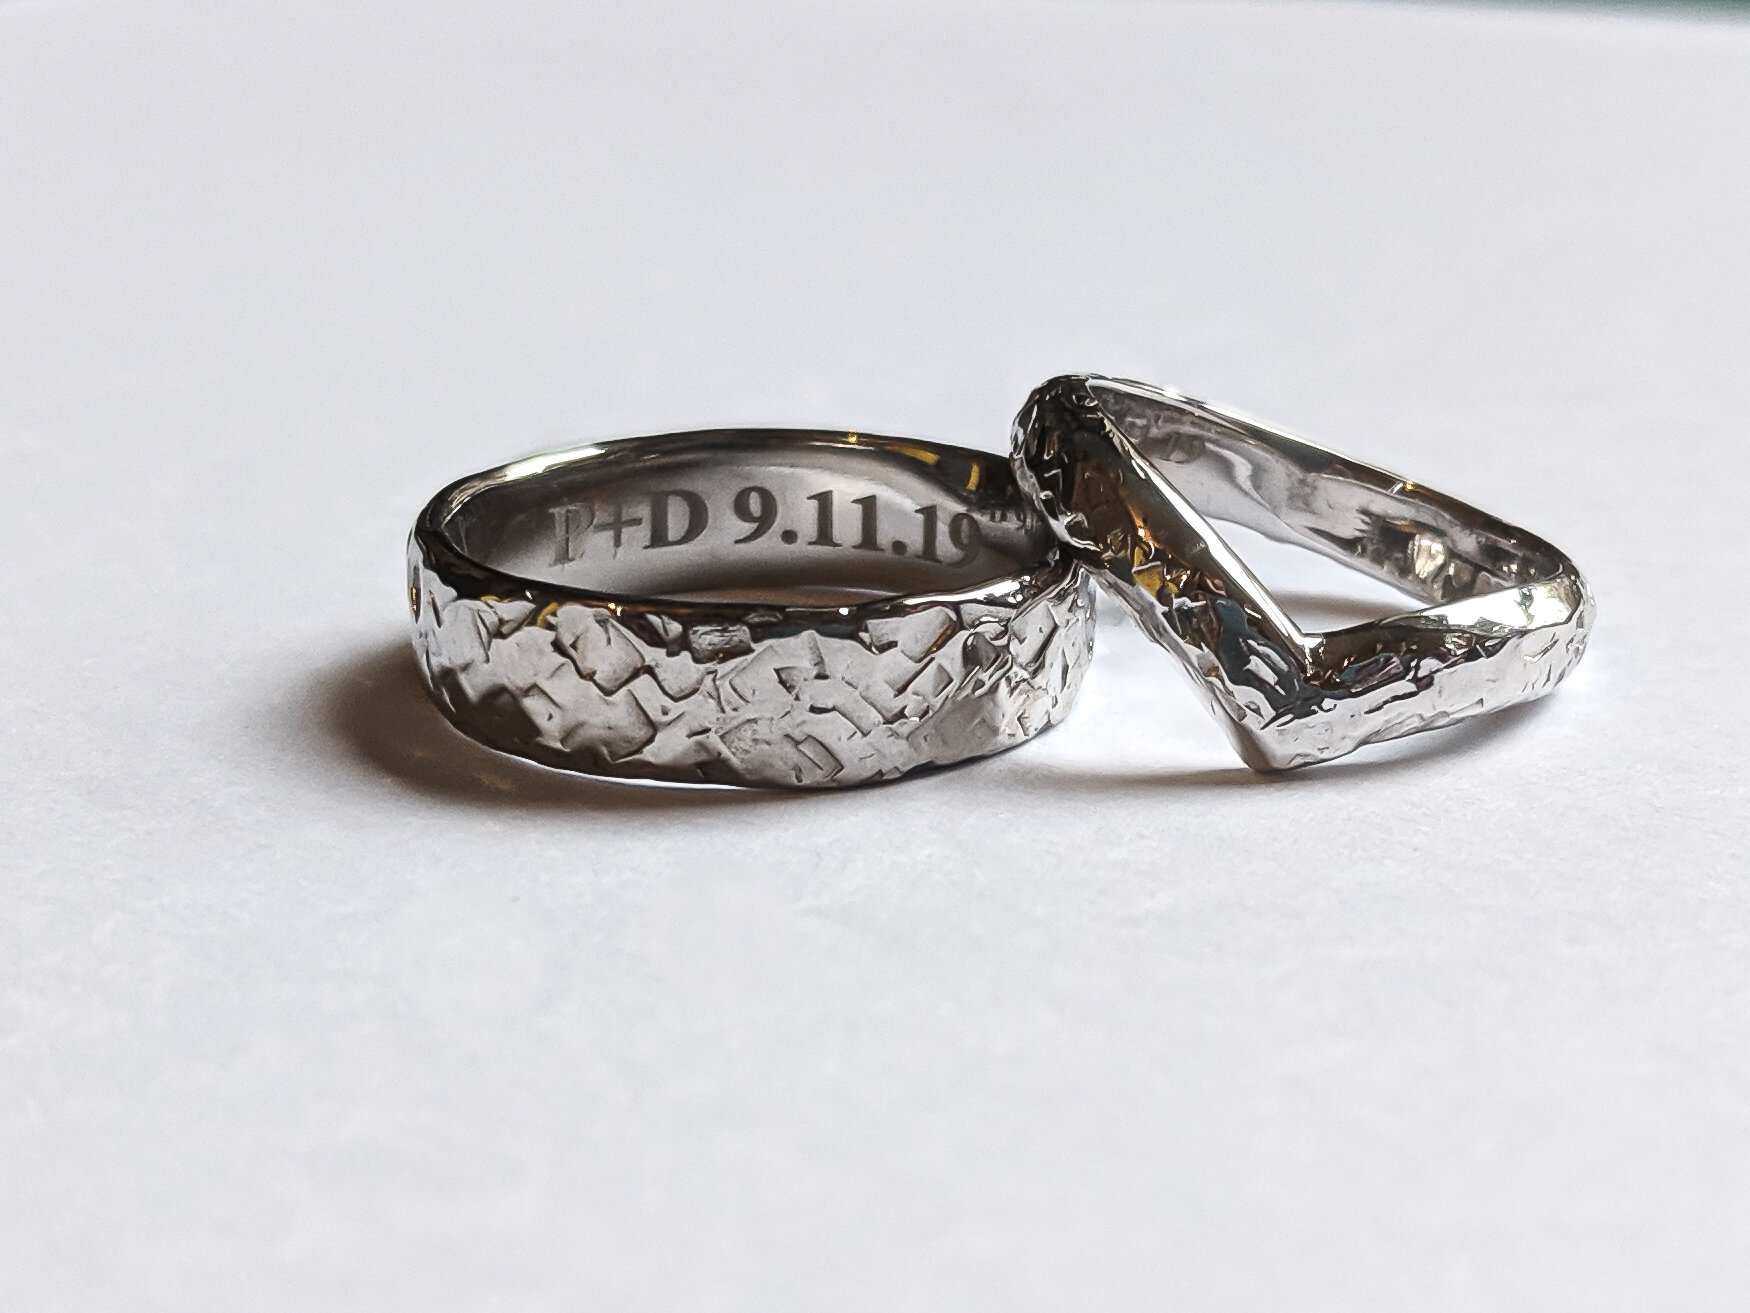 Recycled palladium and fairtrade gold wedding rings